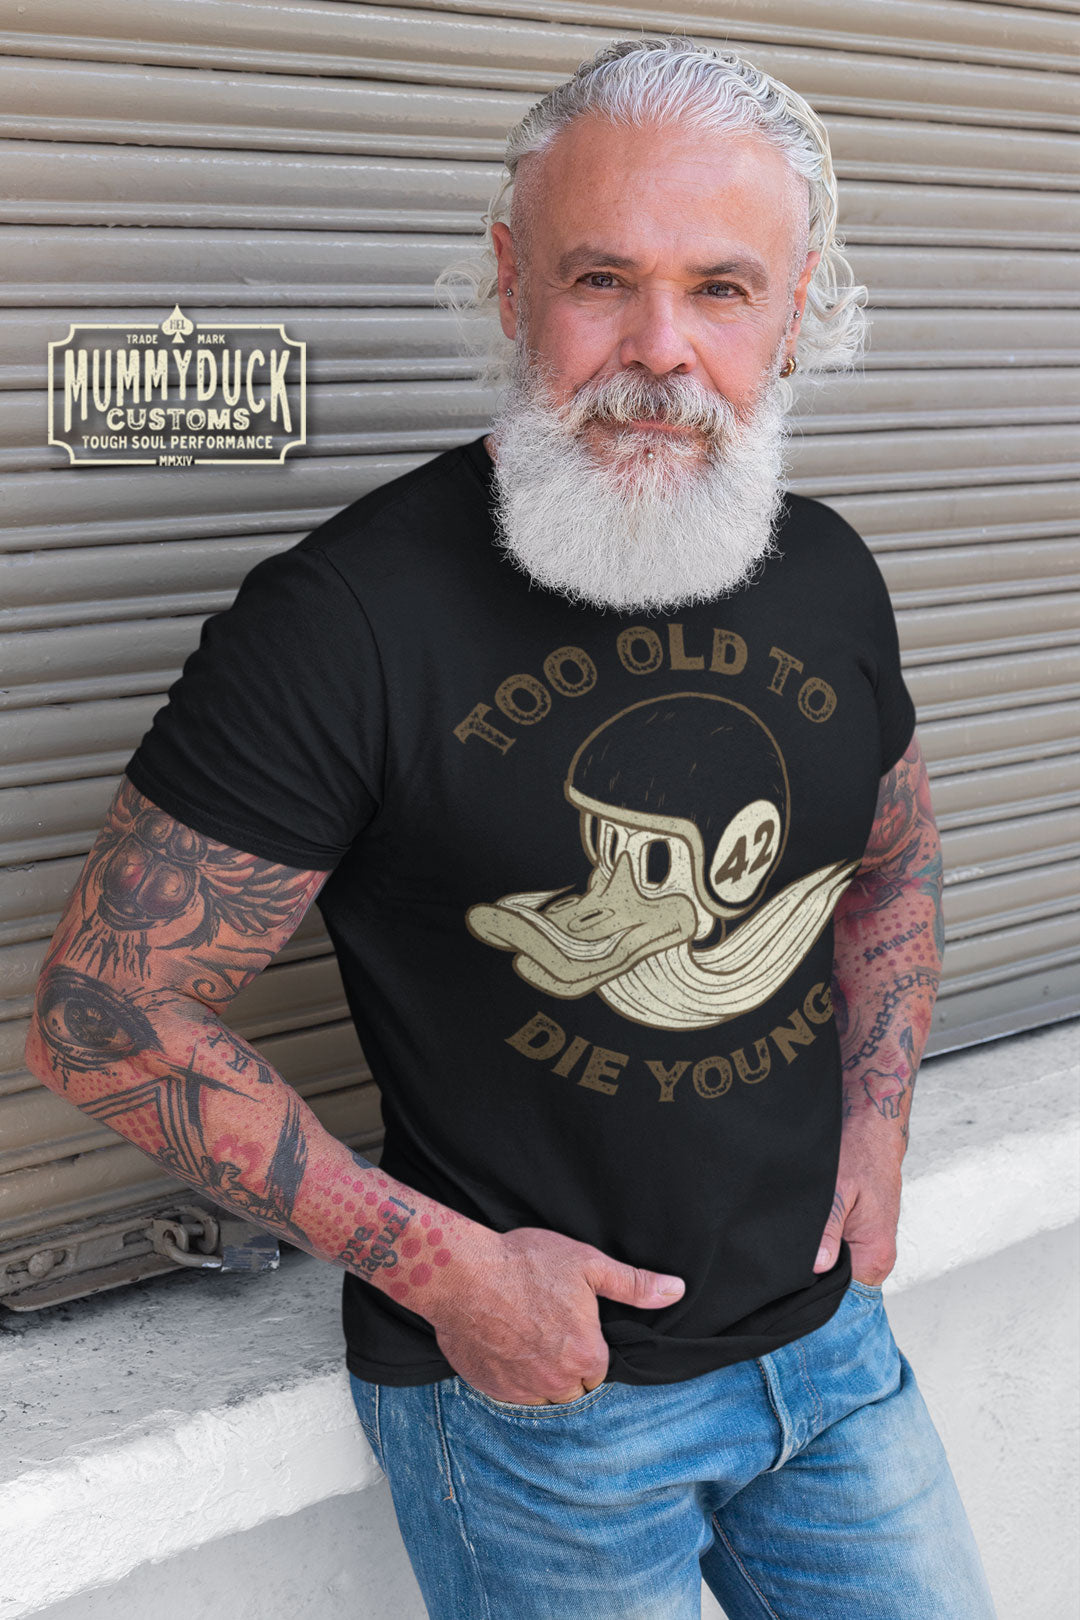 the "Too Old To Die Young" Motorcycle T-Shirt by Mummyduck Customs – a true testament to style, comfort, and the spirit of the open road. If you're a motorcycle enthusiast or simply appreciate distinctive fashion, you've just uncovered the quintessential addition to your wardrobe.